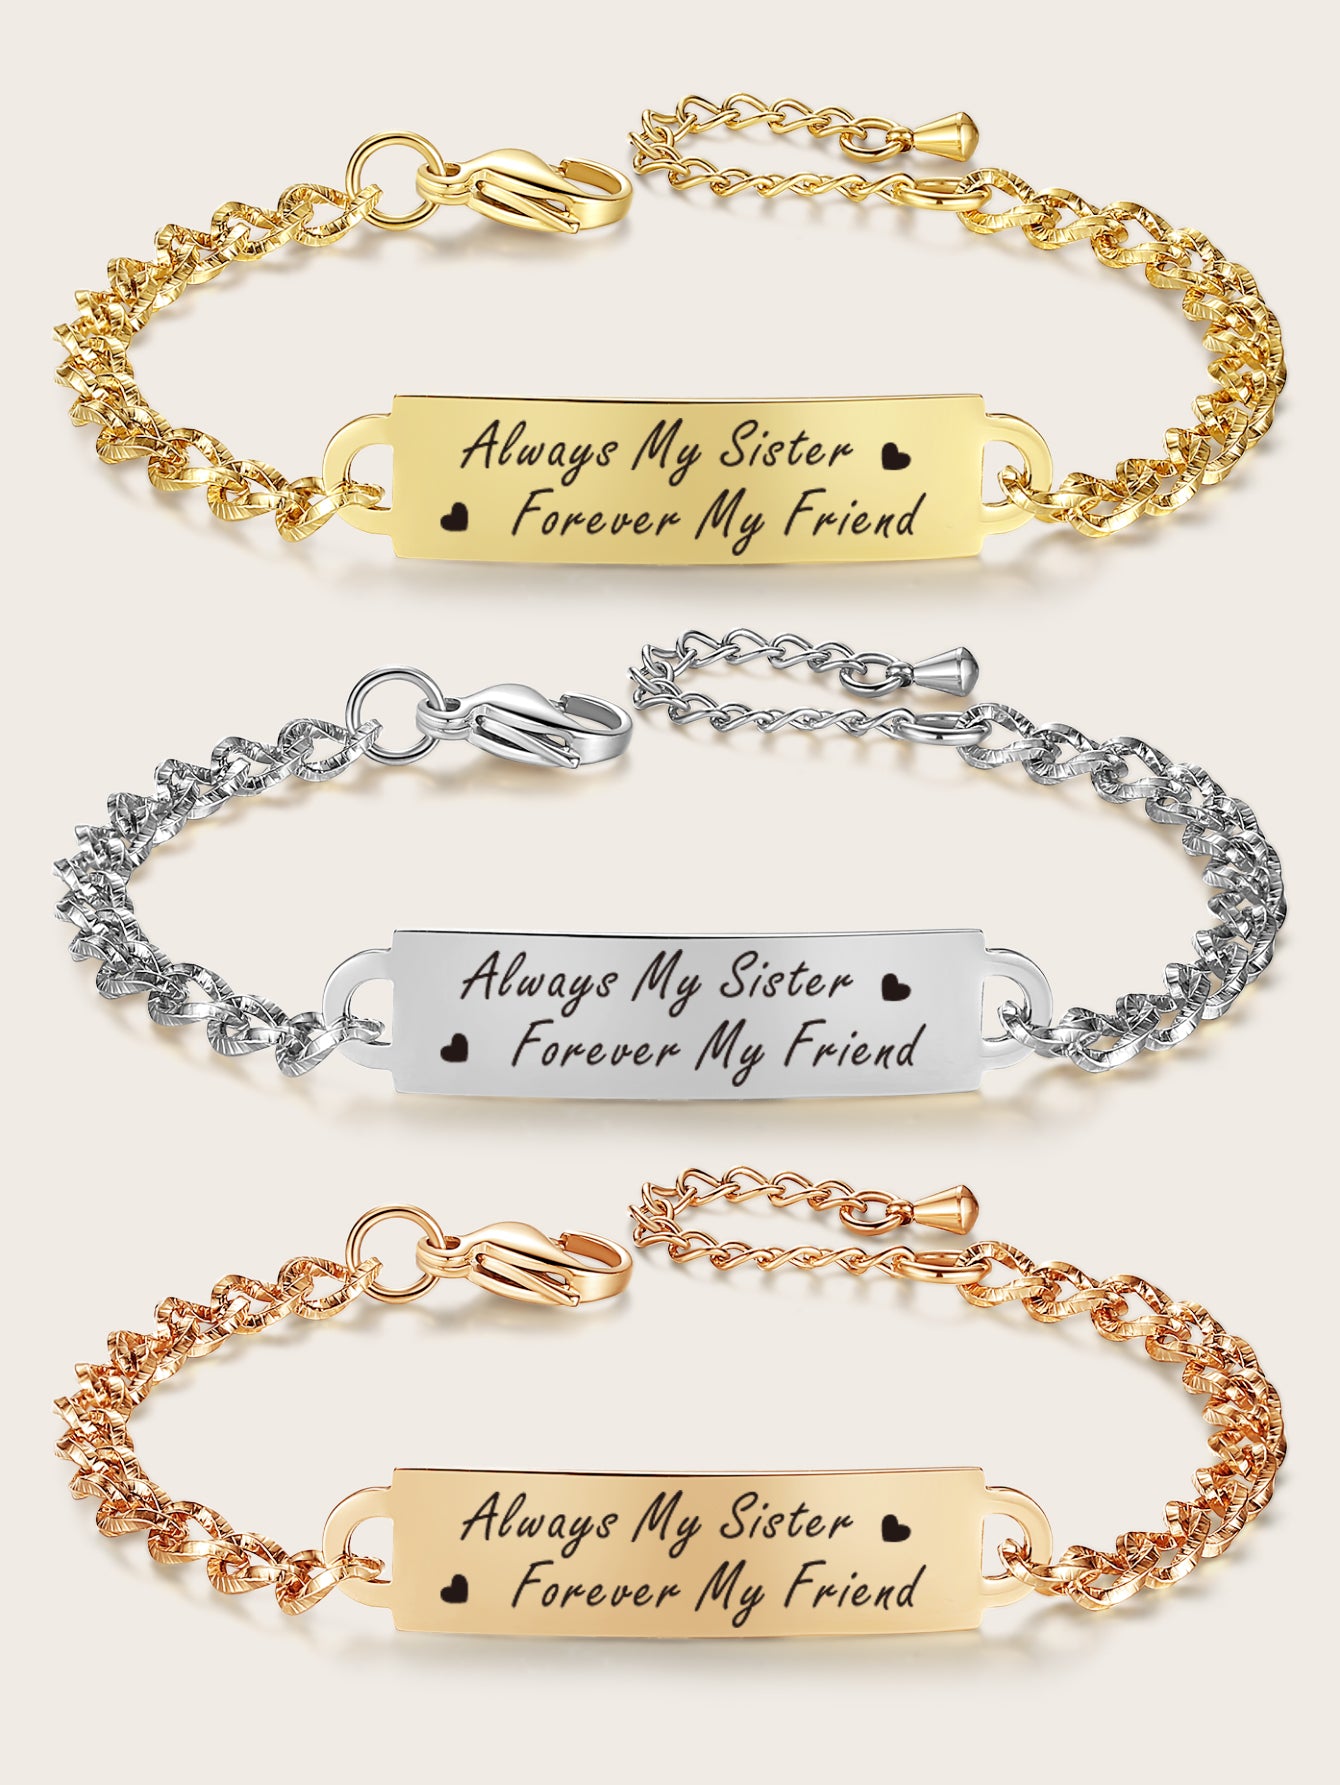 LOVE QUOTES BRACELETS AND NECKLACE